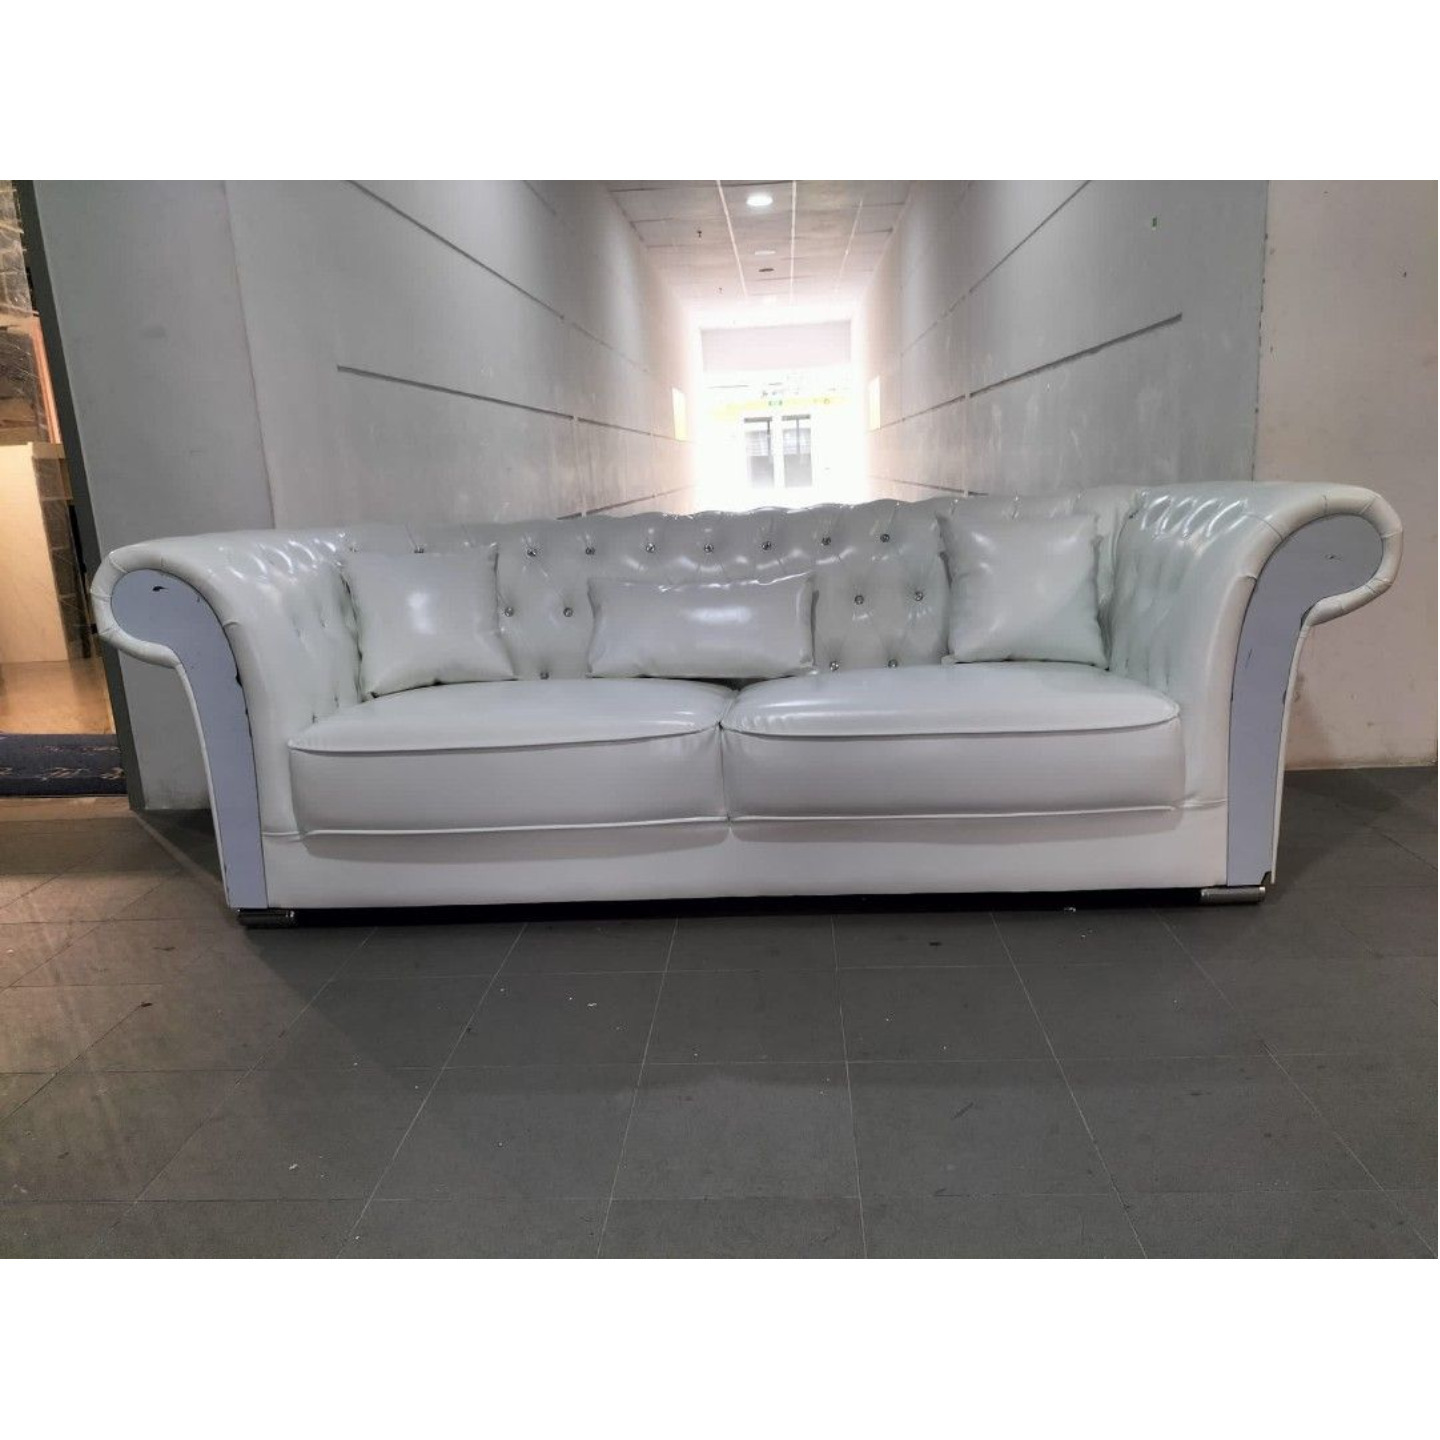 LAVOLK 3.5 Seater Chesterfield Field Sofa in WHITE PU with Crystal Studs